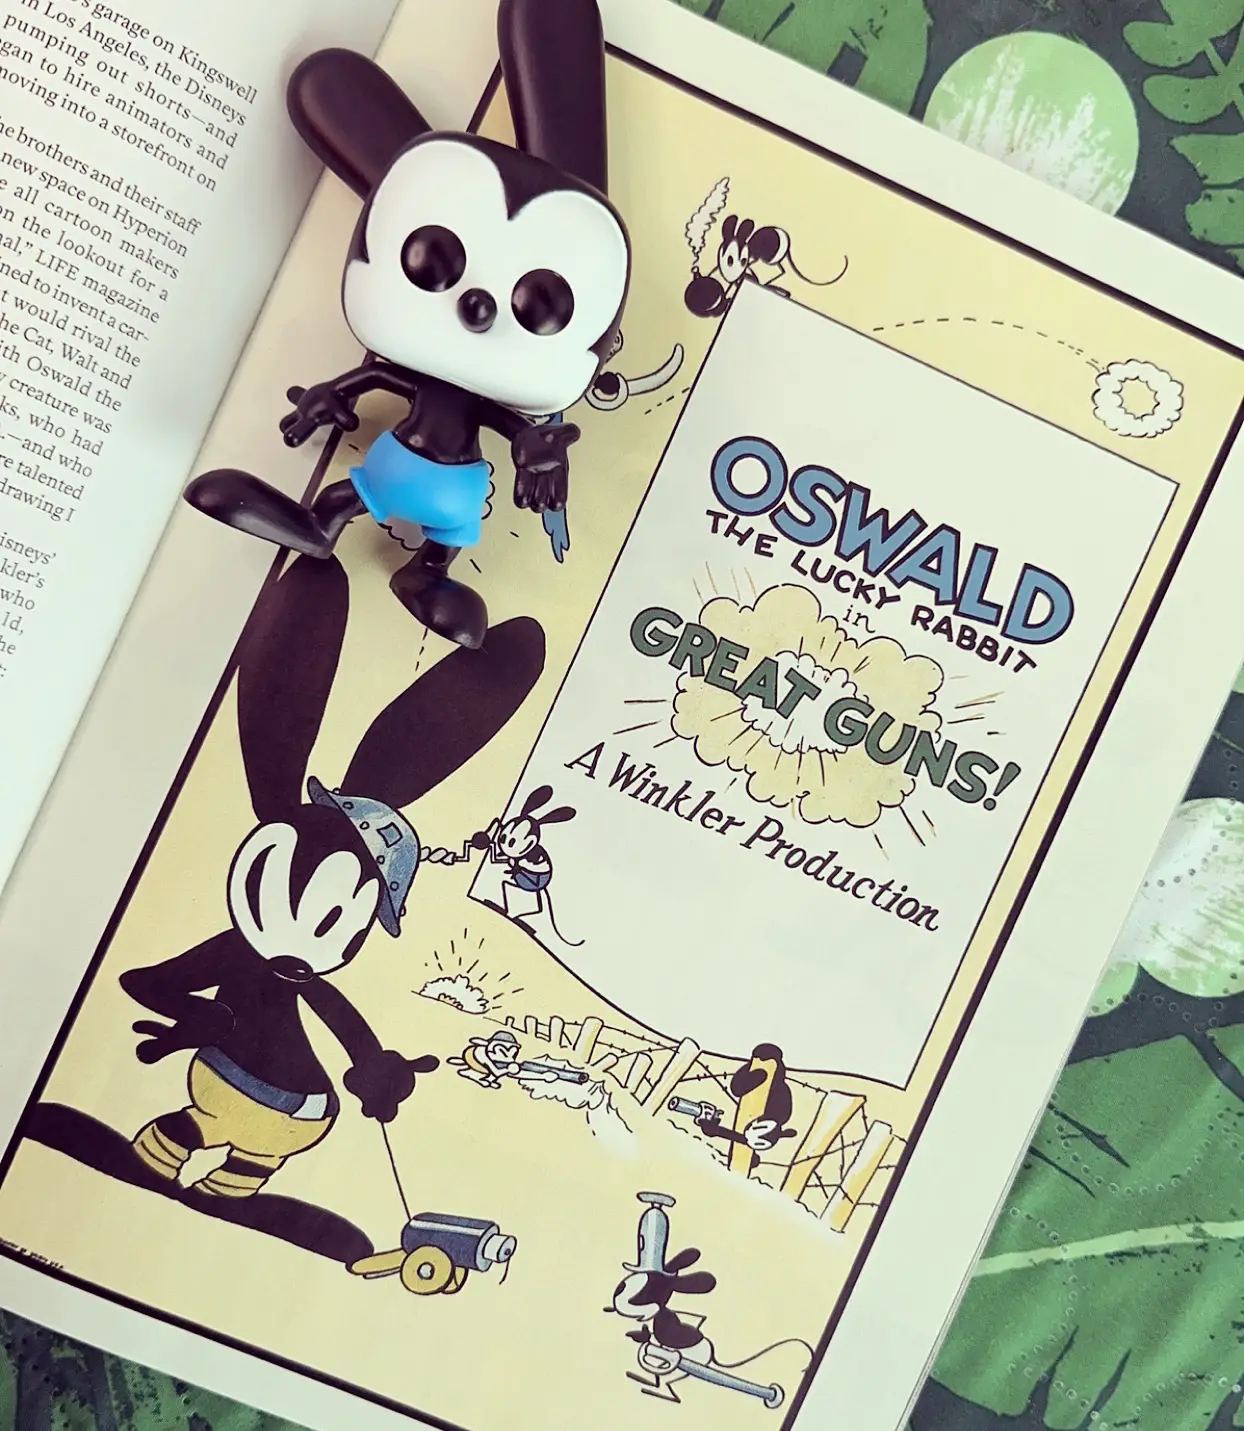 oswald the lucky rabbit and mickey mouse brothers